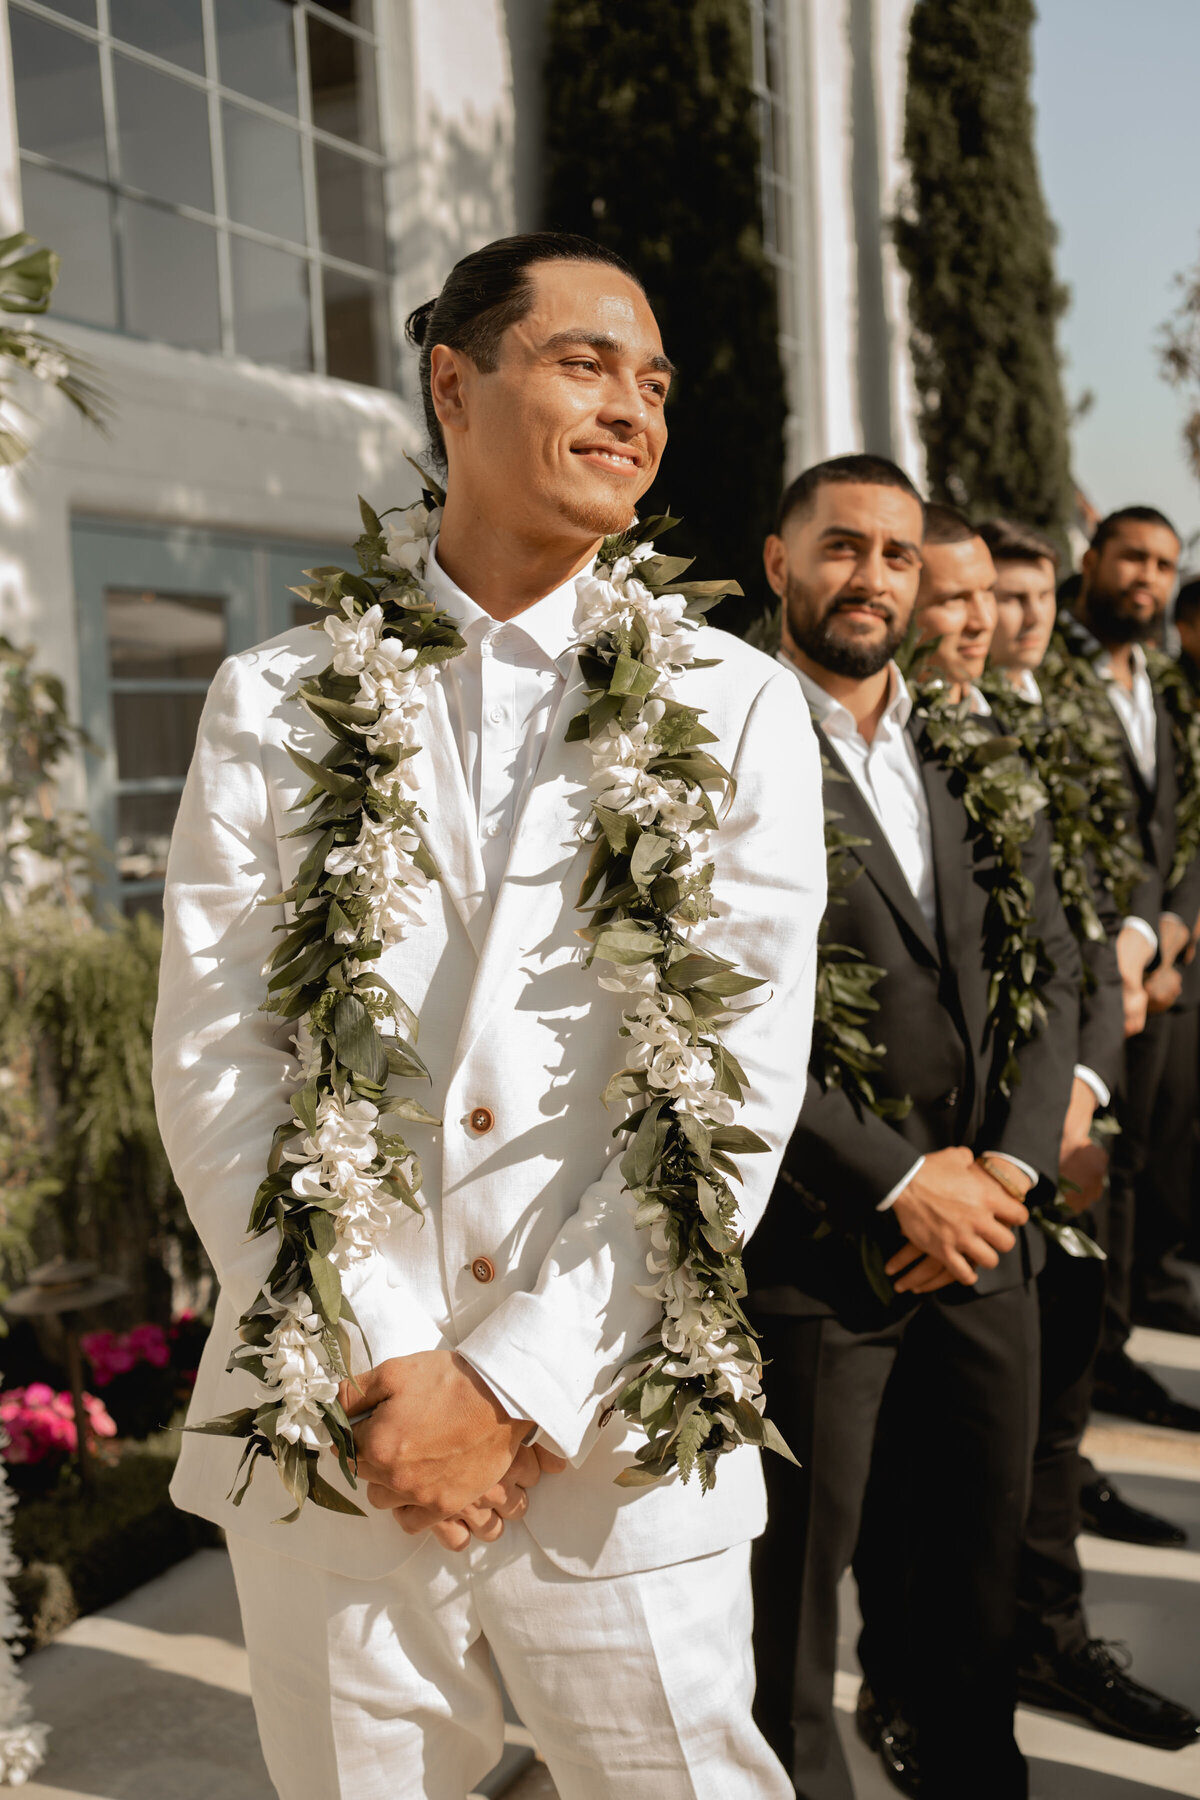 Jordan-and-kyle-southern-california-wedding-planner-the-pretty-palm-leaf-event-7